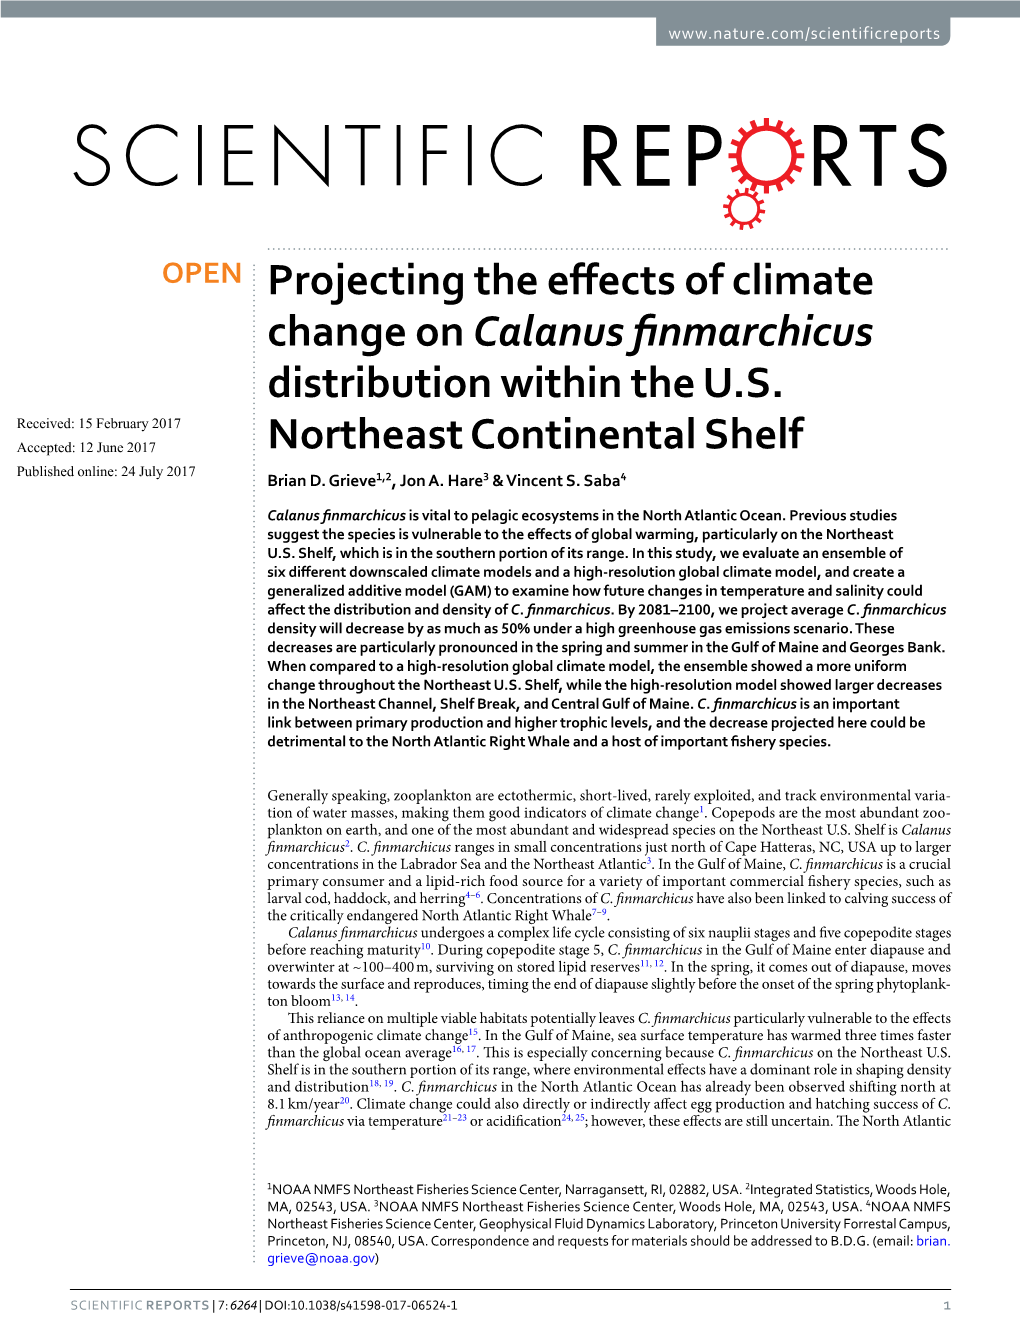 Projecting the Effects of Climate Change on Calanus Finmarchicus